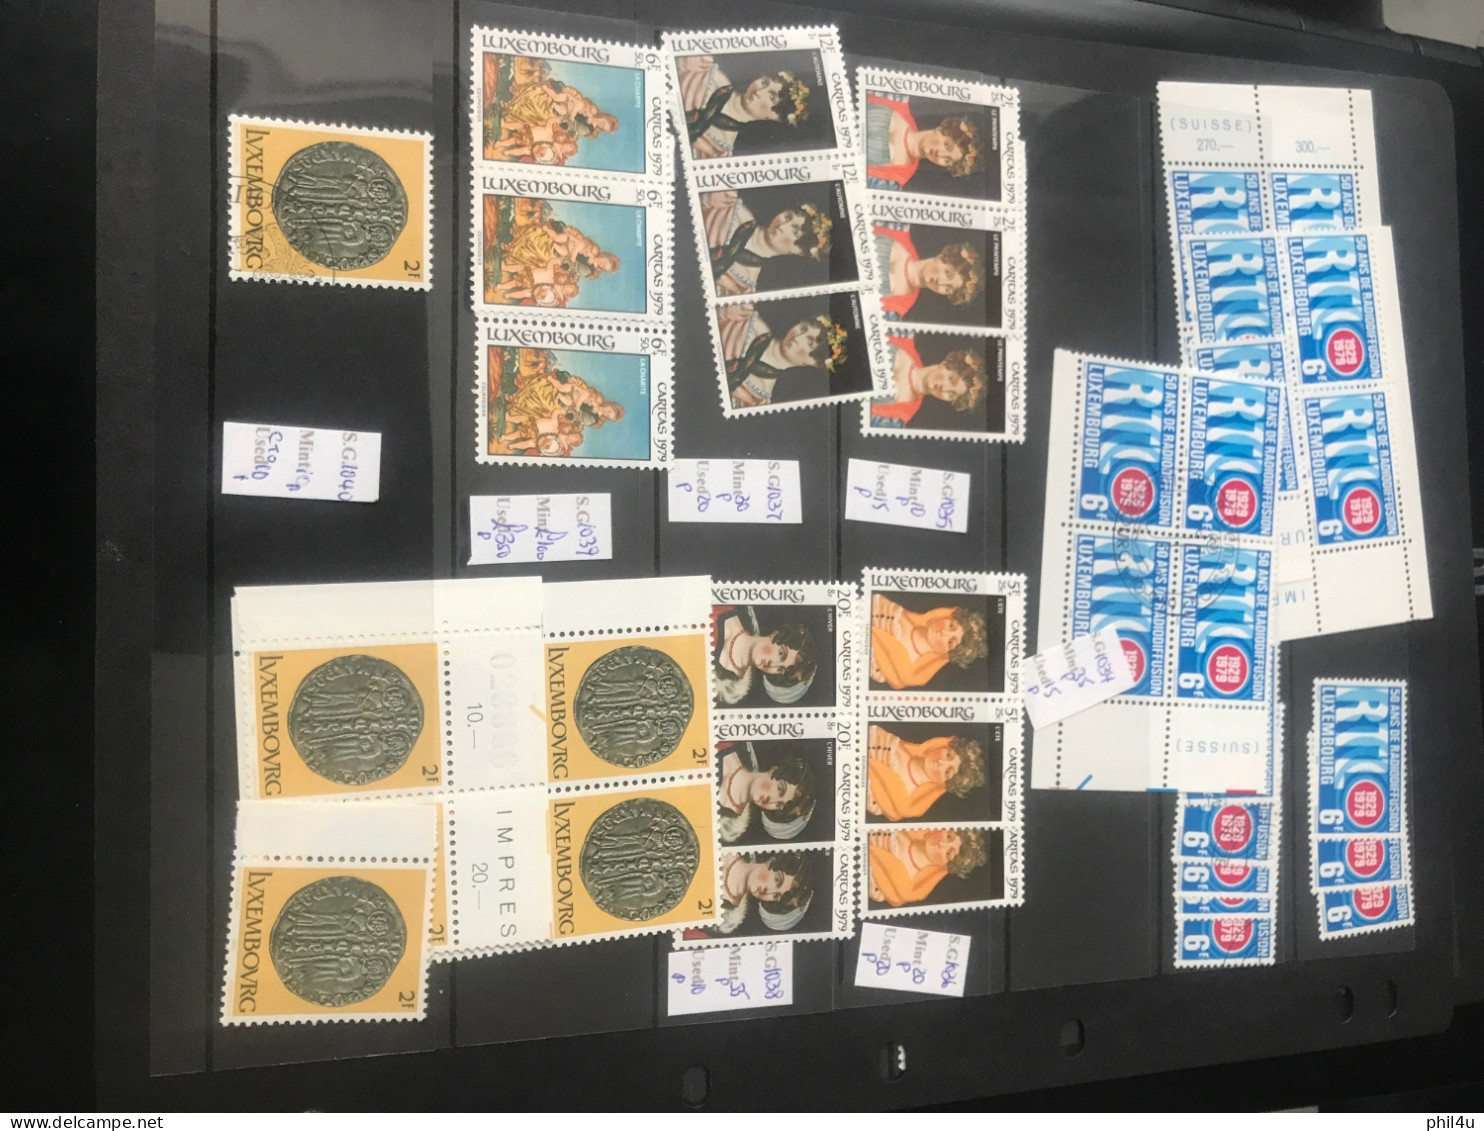 Luxembourg MNH and used stamps on stock sheets with duplicate sets price to sell always welcome your offers